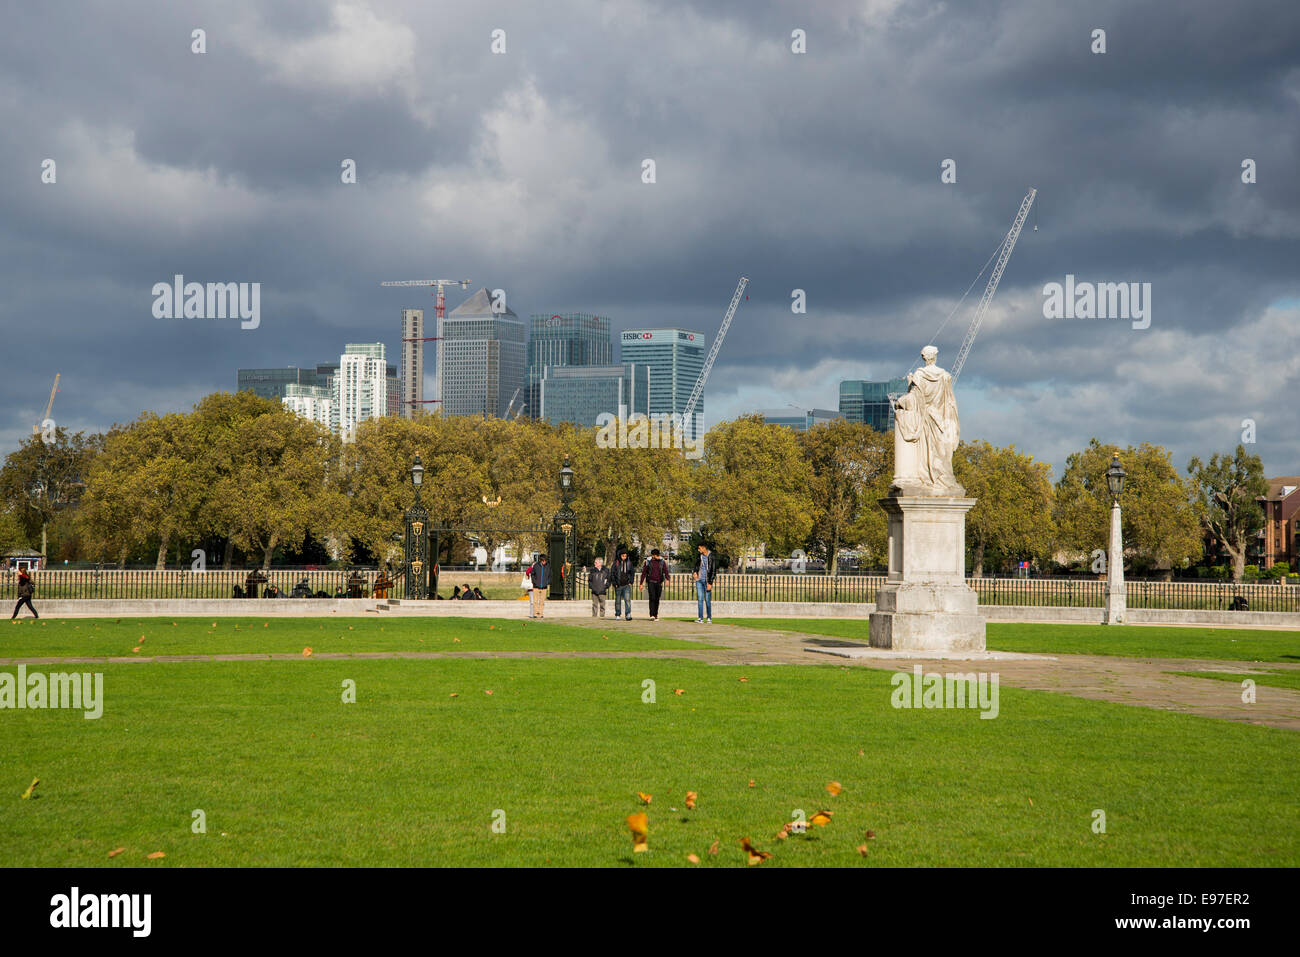 Statue of King George II in the Old Royal Naval College, Greenwich with Canary Wharf, London Docklands in the background Stock Photo